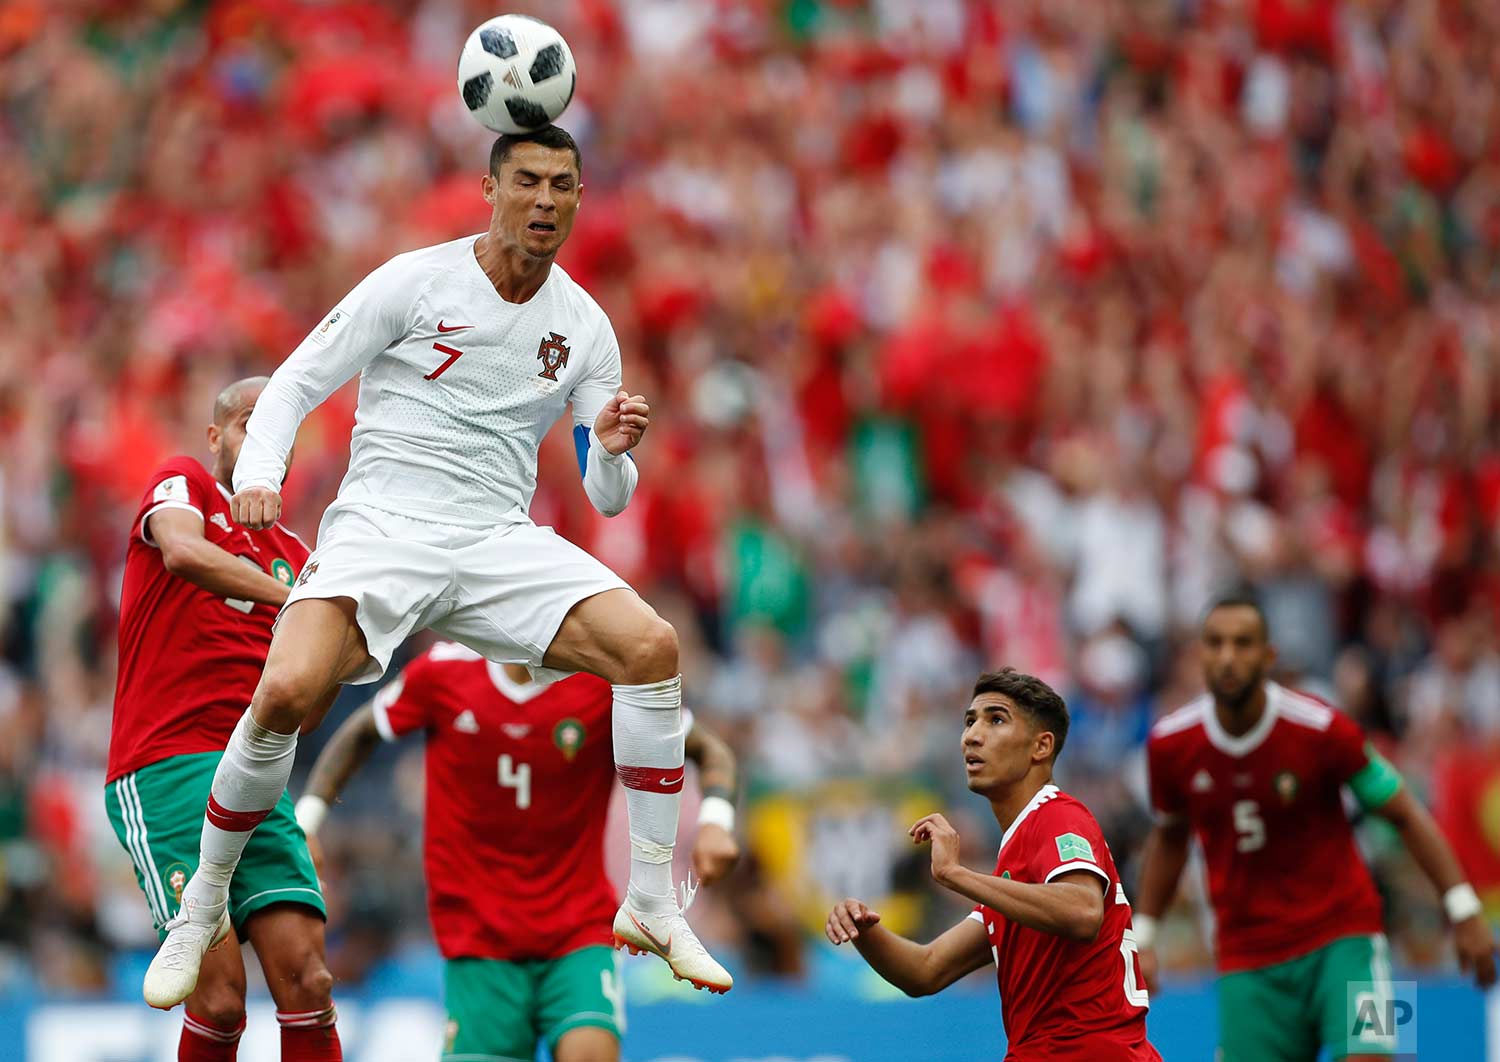  Portugal's Cristiano Ronaldo leaps up for a header during the group B match between Portugal and Morocco at the 2018 soccer World Cup in the Luzhniki Stadium in Moscow, Russia, Wednesday, June 20, 2018. (AP Photo/Francisco Seco) 